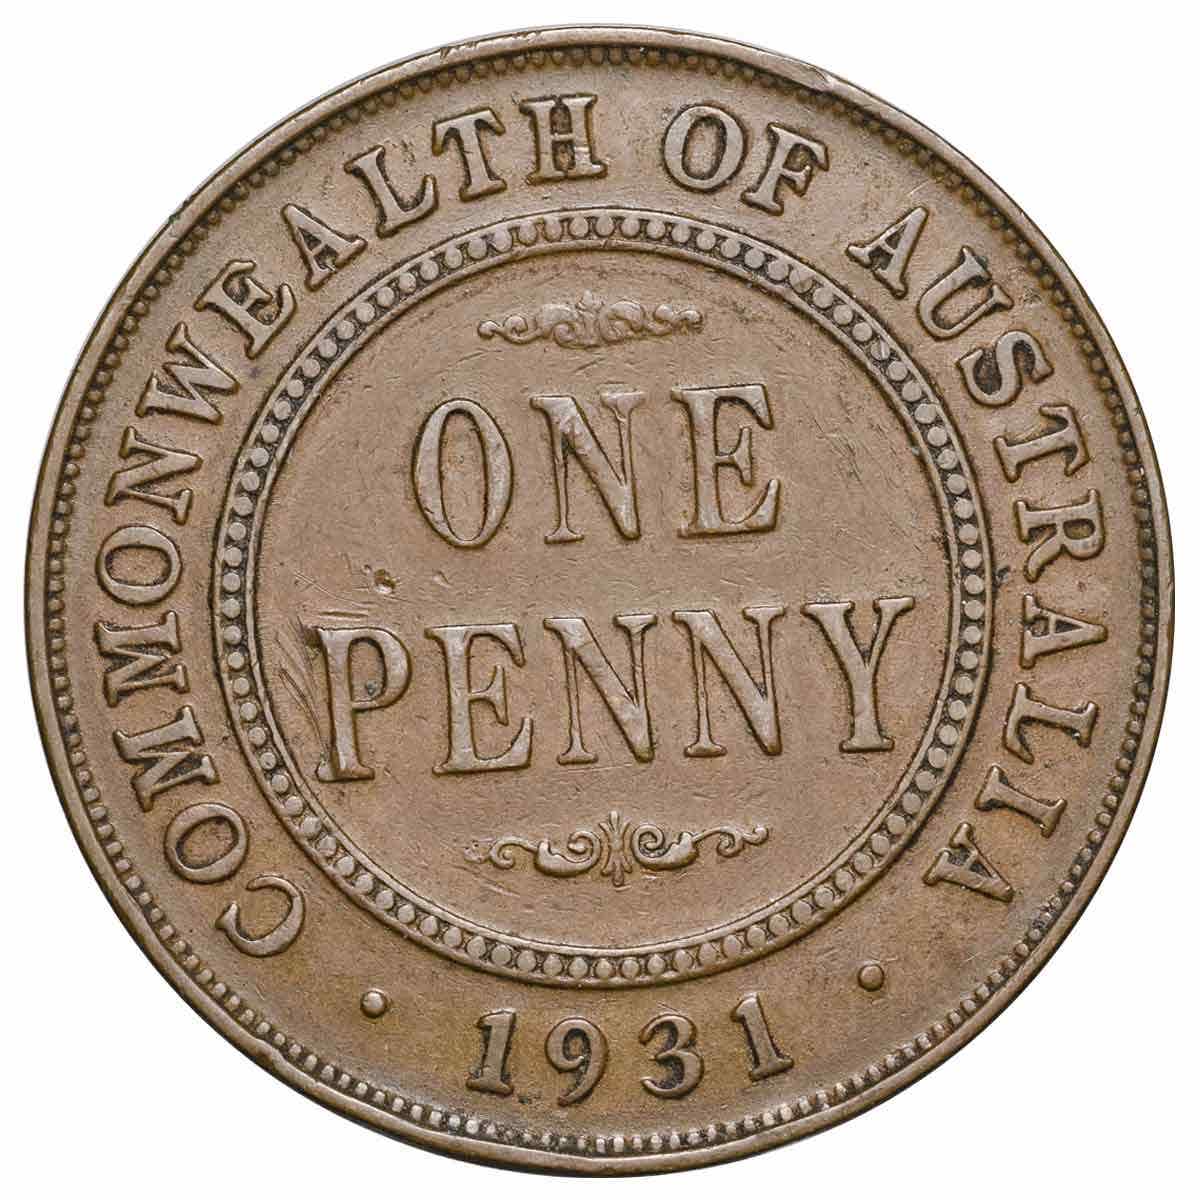 1931 Penny Indian & London Obverse Pair Fine-Very Fine